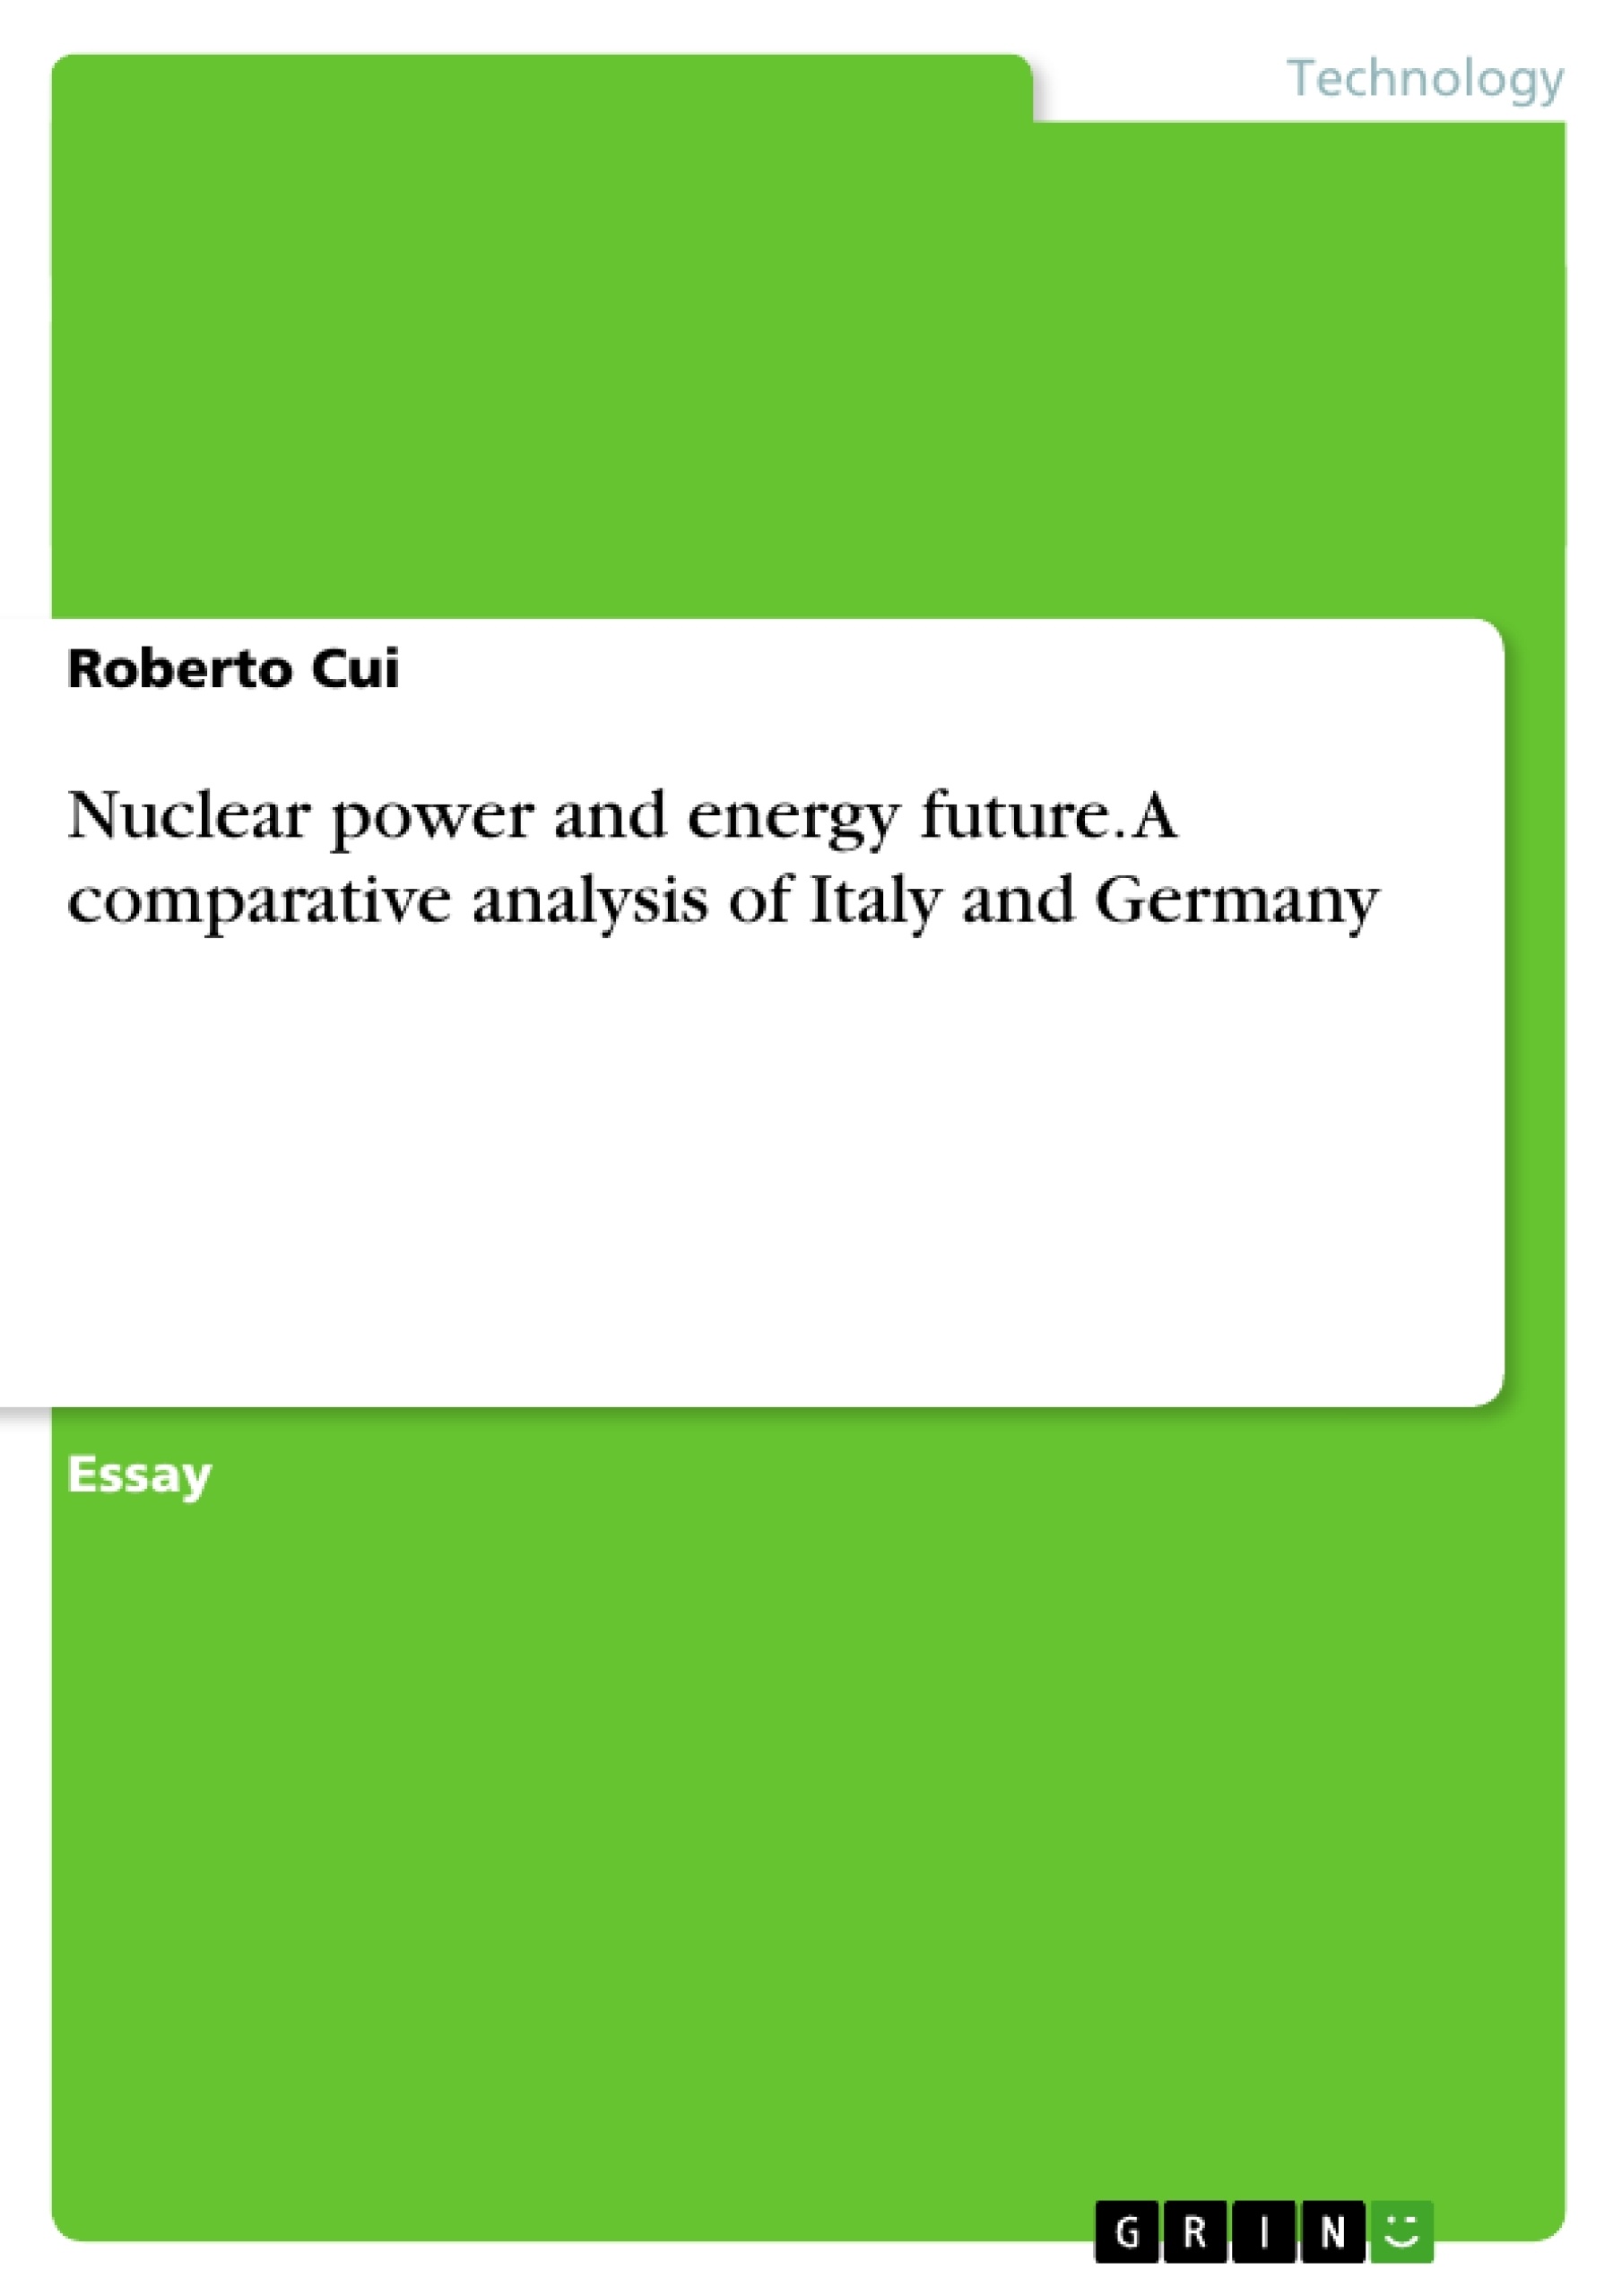 Title: Nuclear power and energy future. A comparative analysis of Italy and Germany